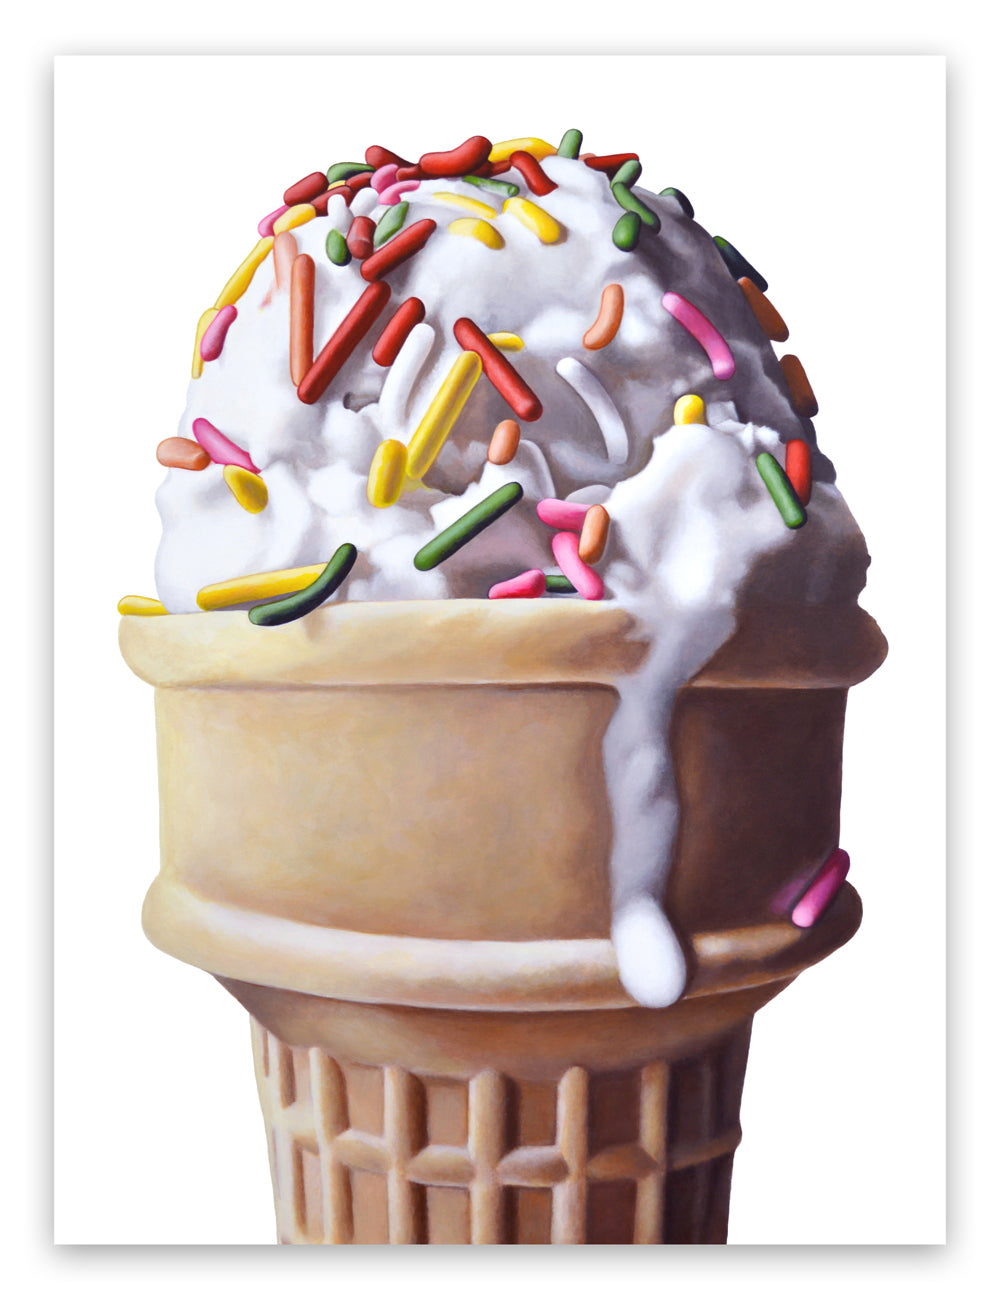 Vanilla with Sprinkles Ice Cream Cone Art Print | Limited Edition of 50